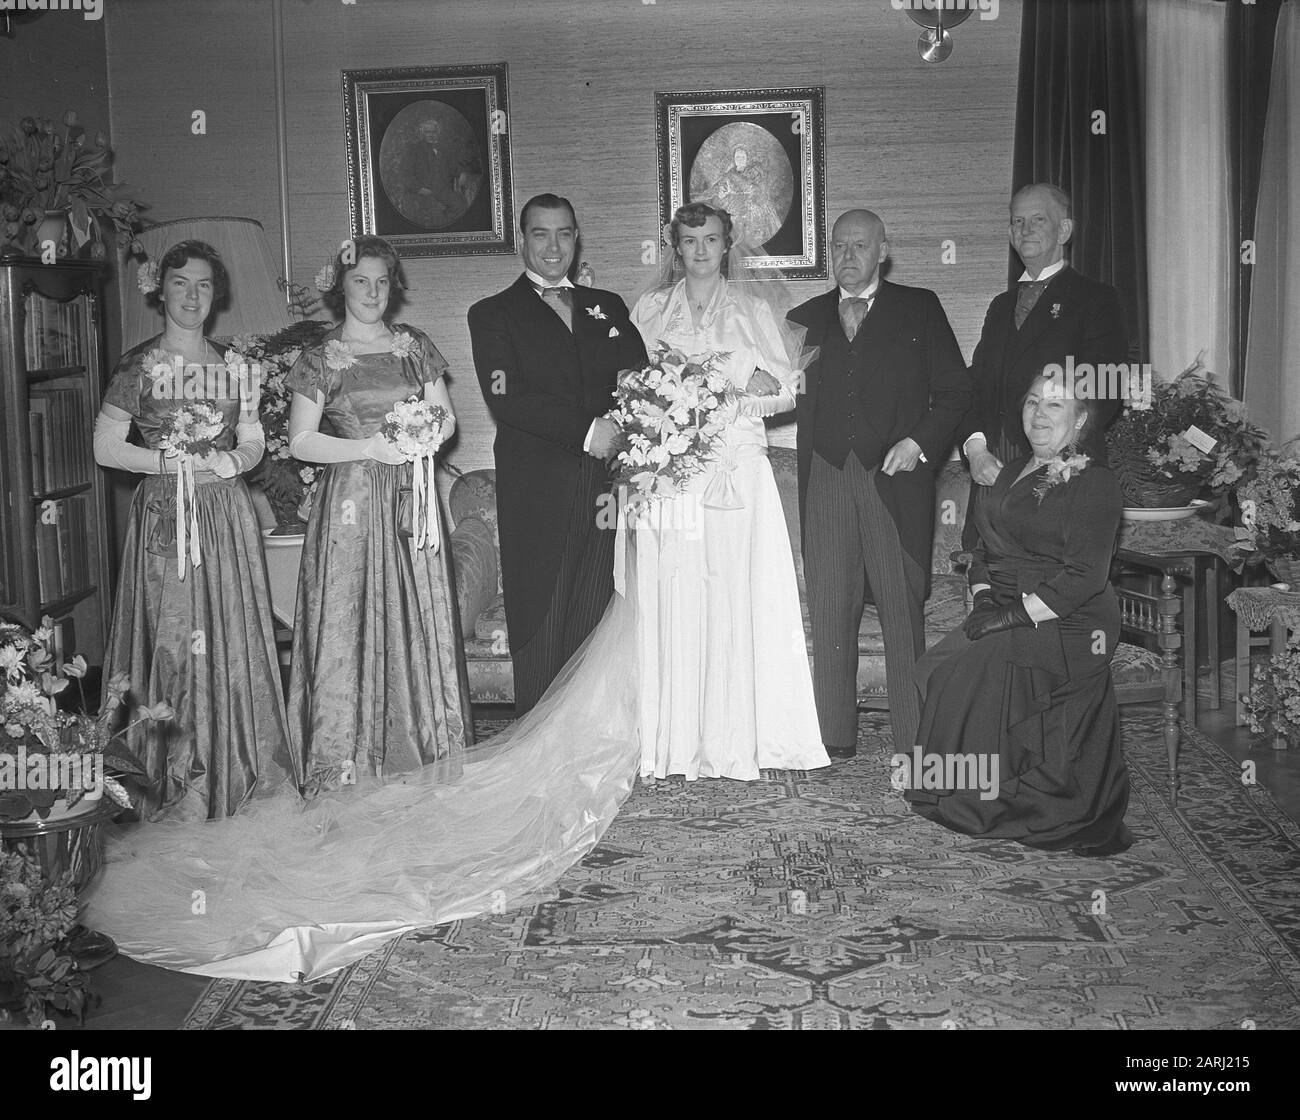 Marriage of Mr. Hans Smulders with Mary Sevenstern. The bride and groom with bridesmaids and parents Annotation: J.P.M.A. Smulders (1912-) was a member of the management Anefo. Mary Sevenstern was a daughter of the owner of the distillery Sevenstern in Dieren Date: 4 January 1951 Location: Animals Keywords: bridal couples, marriages Personal name: Sevenstern, M., Smulders, J.P.M.A. Stock Photo